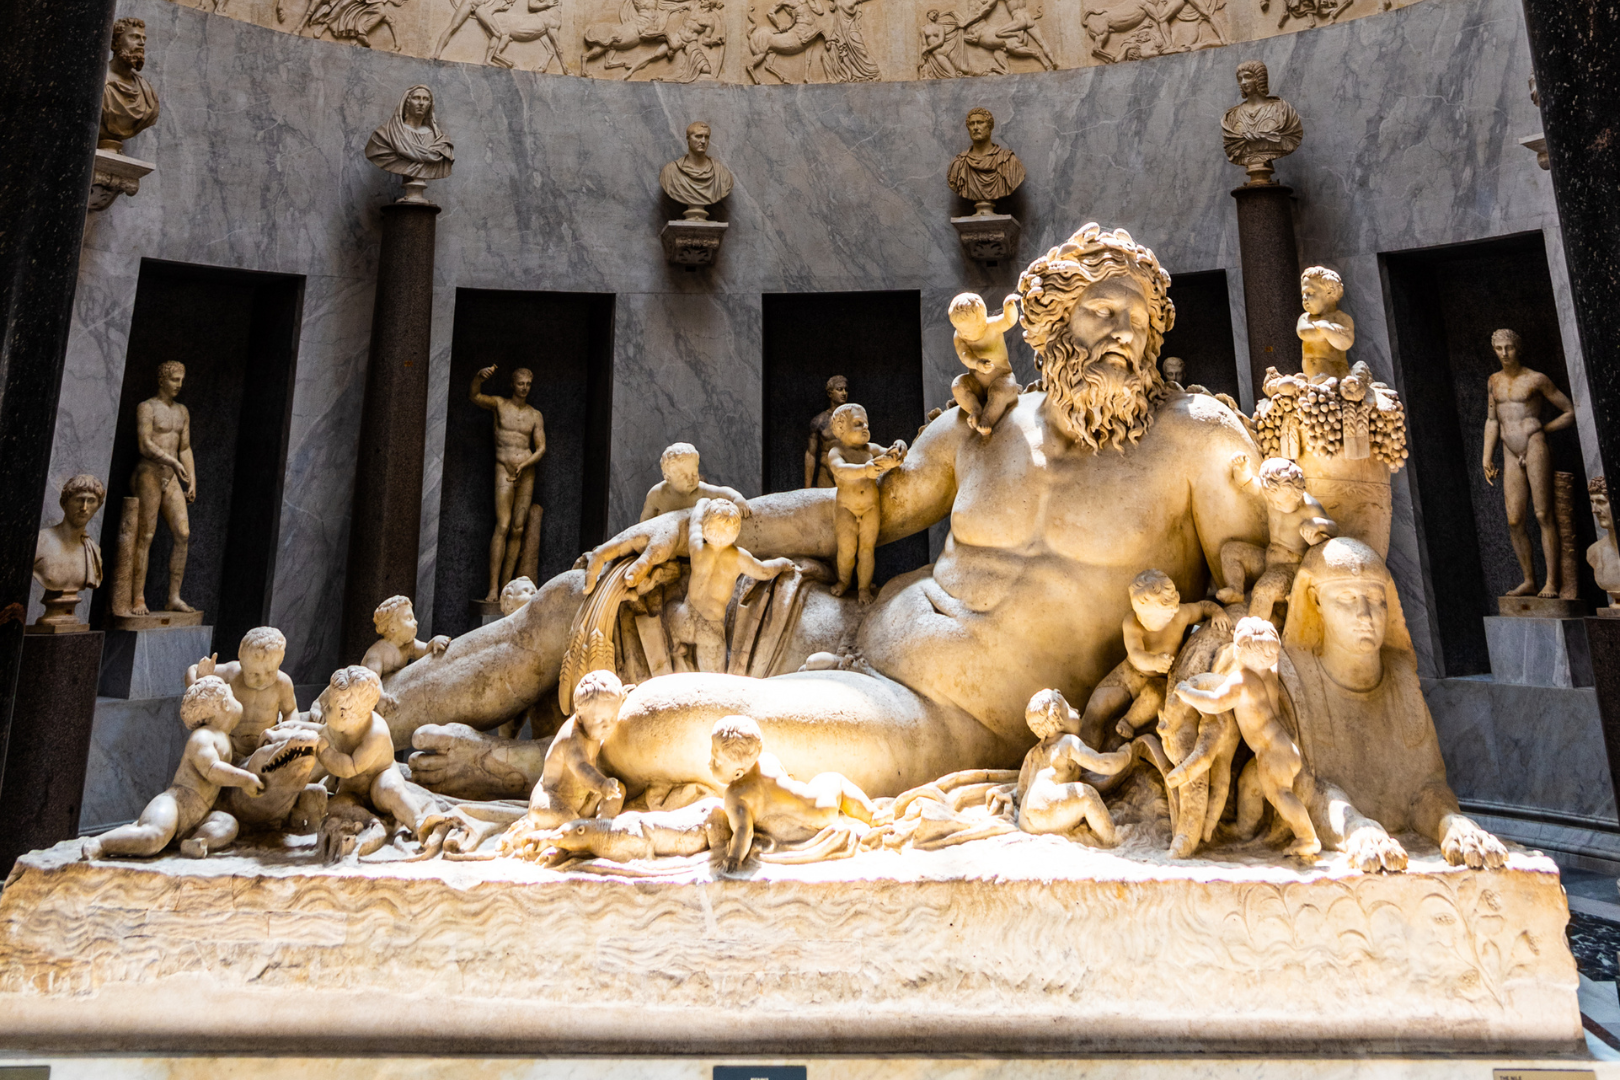 Statue of the Nile displayed in the Vatican Museums.